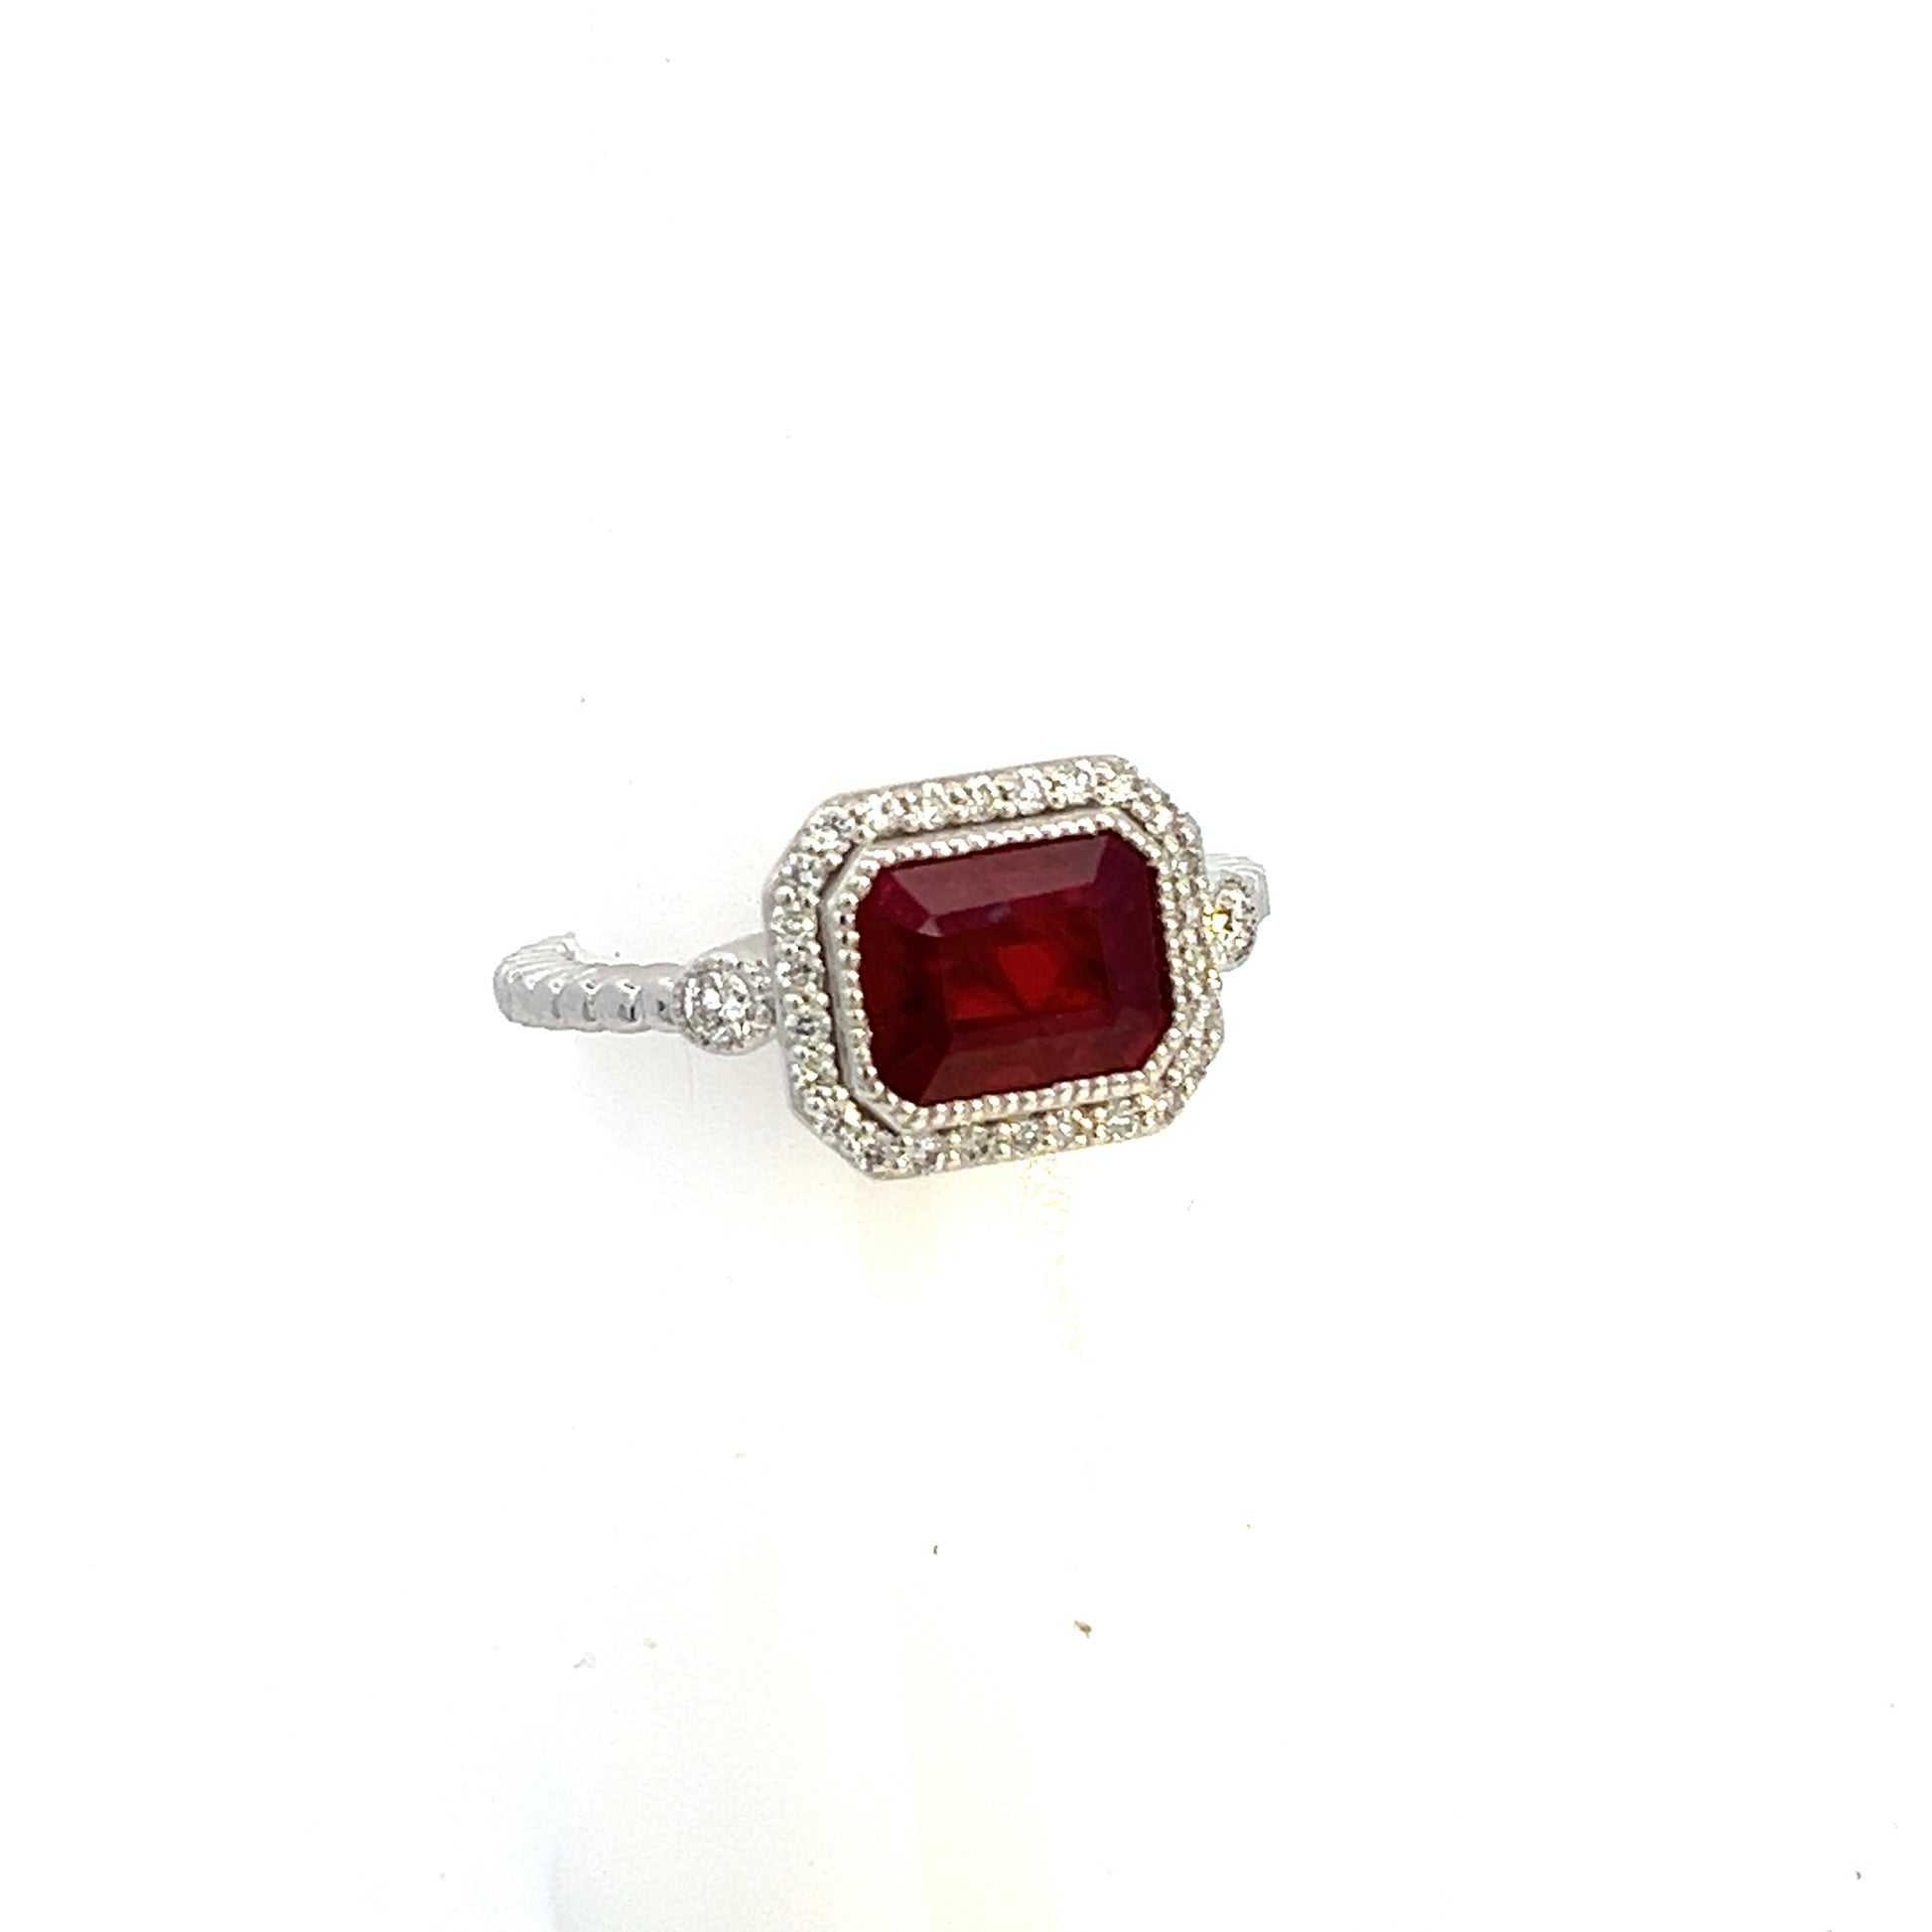 Natural Ruby and White Sapphire Ring 6.5 14k W Gold 2.46 TCW Certified $3,950 310638